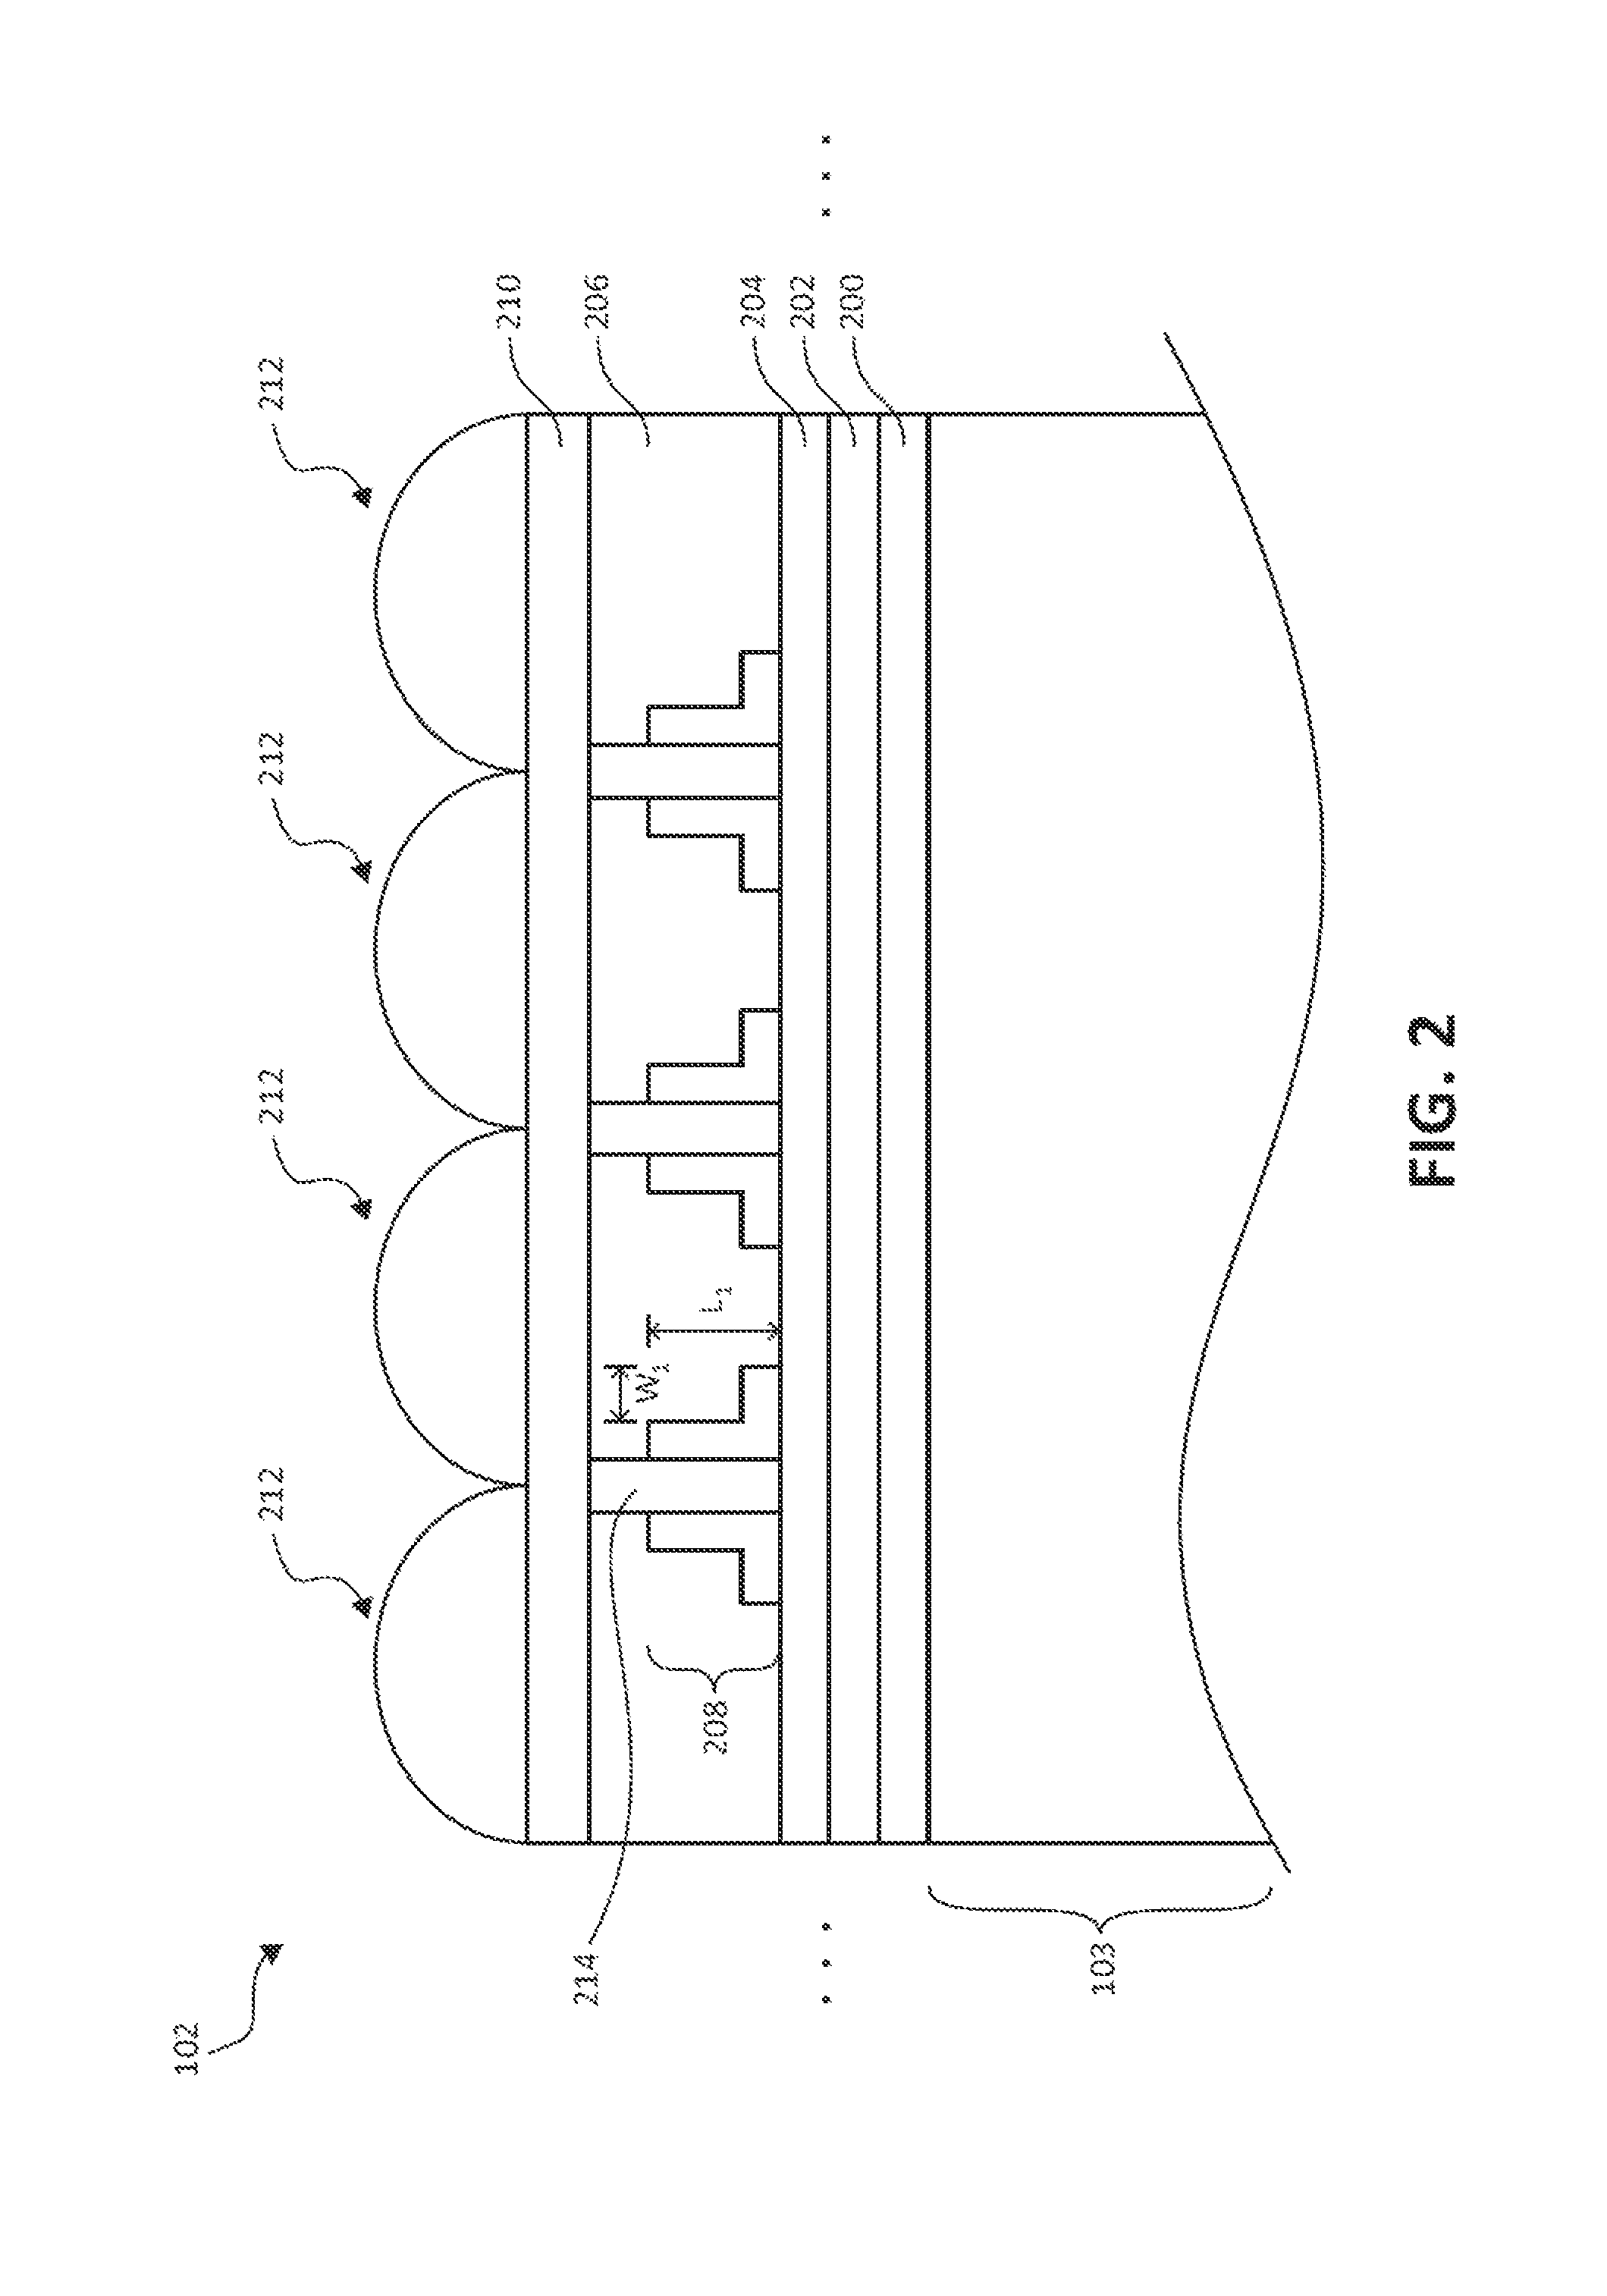 Imaging systems with integrated light shield structures